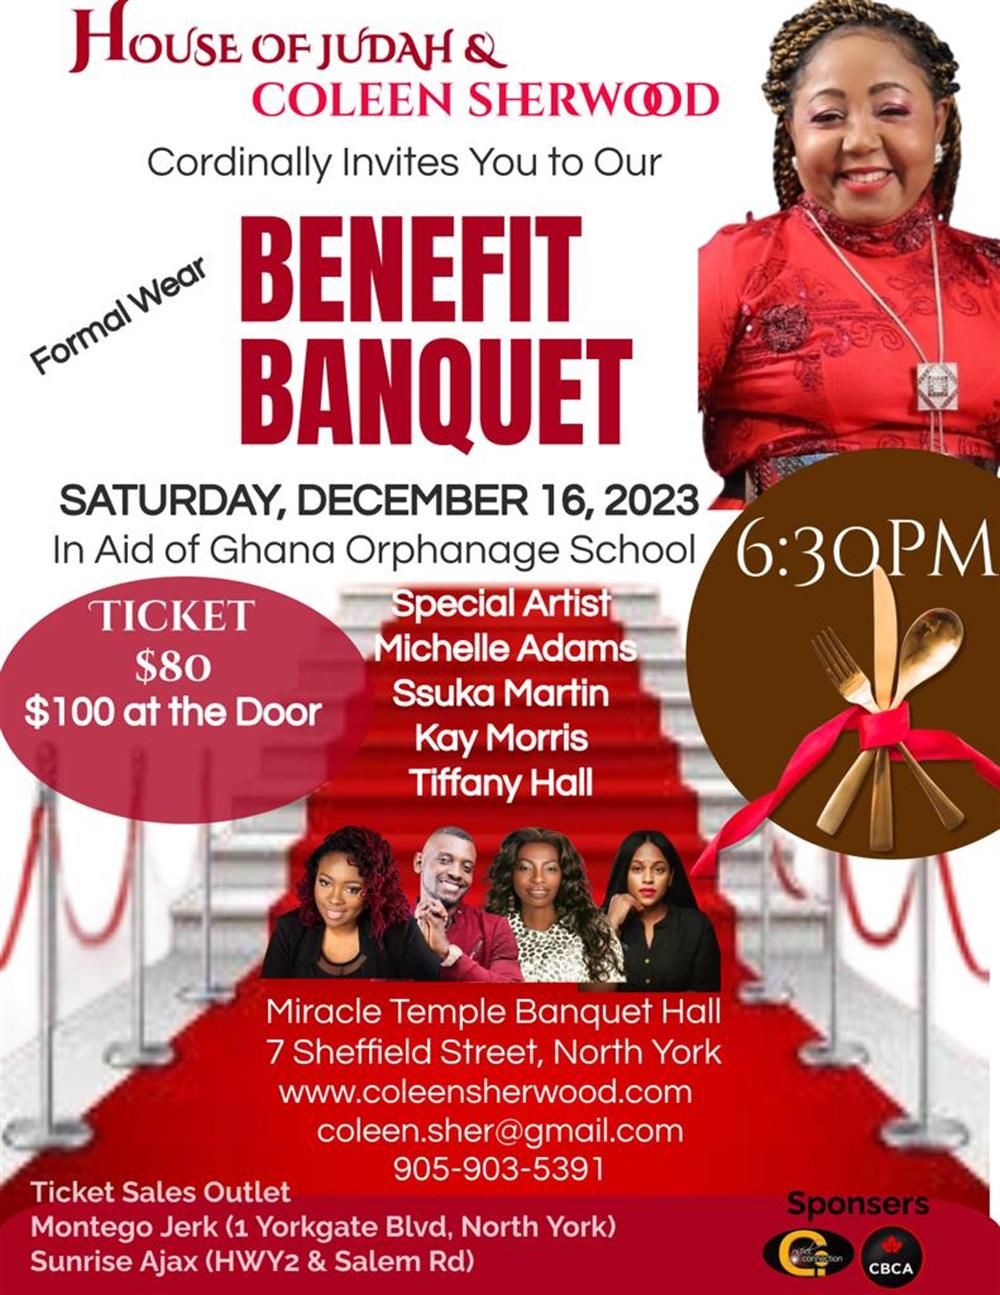 Benefit Banquet in Aid of Ghana Orphanage School on Saturday December 16, 2023